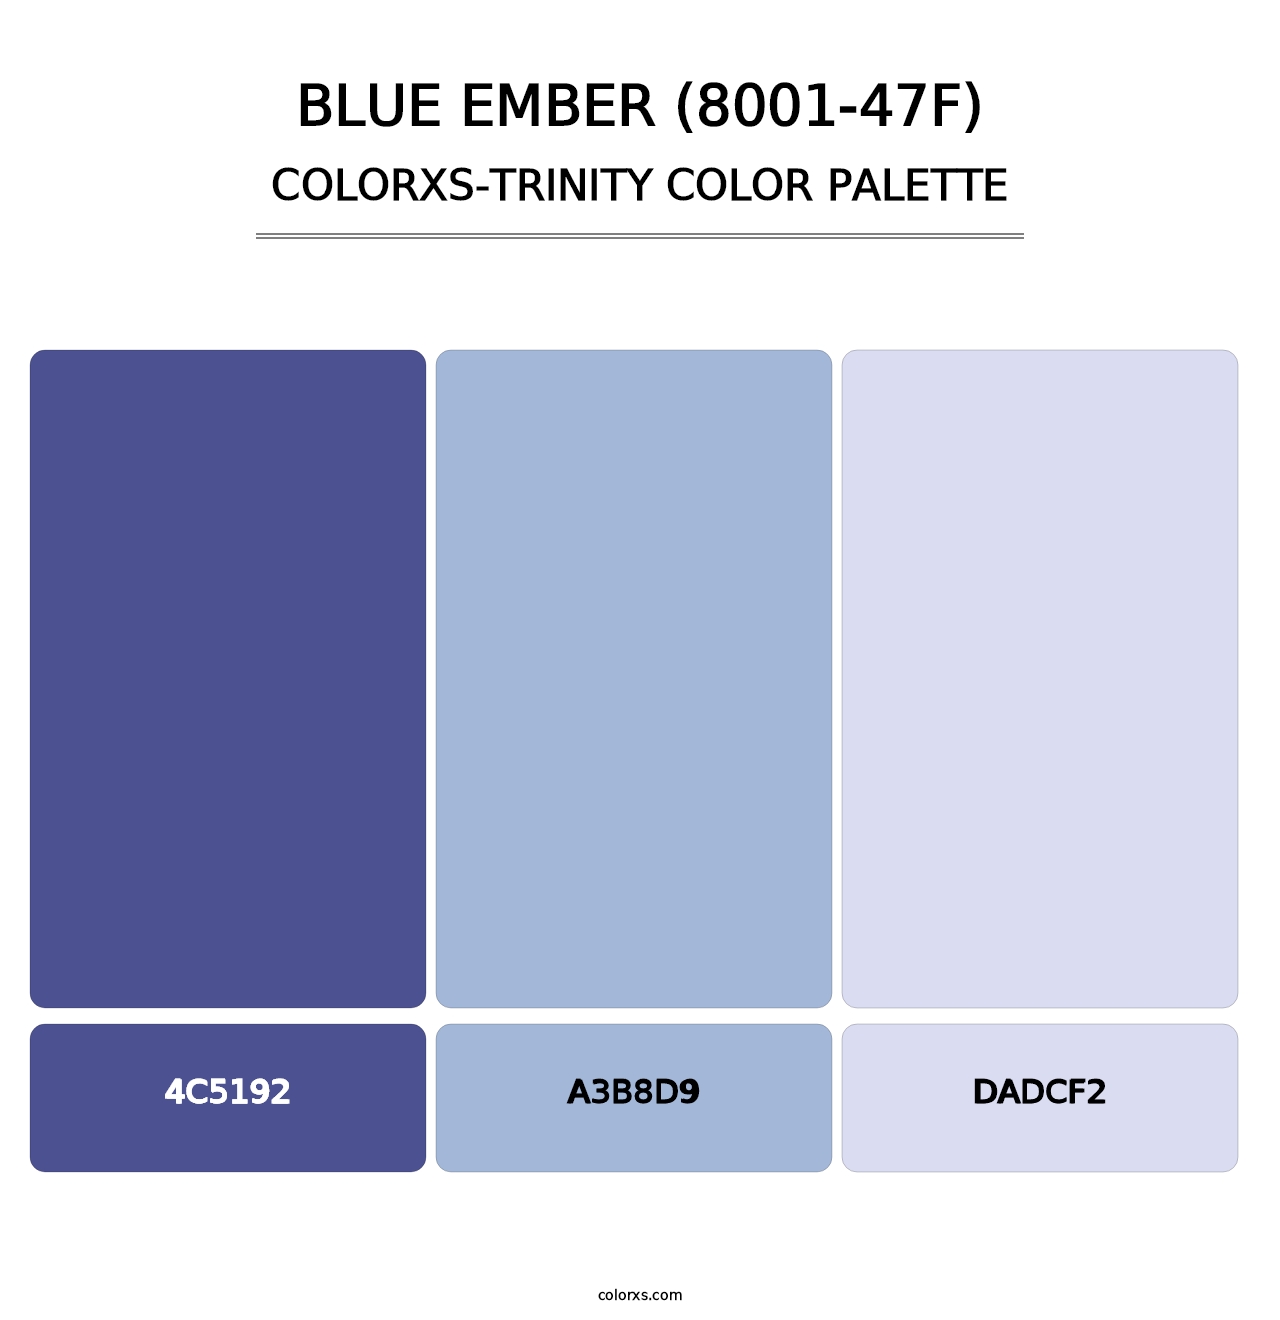 Blue Ember (8001-47F) - Colorxs Trinity Palette